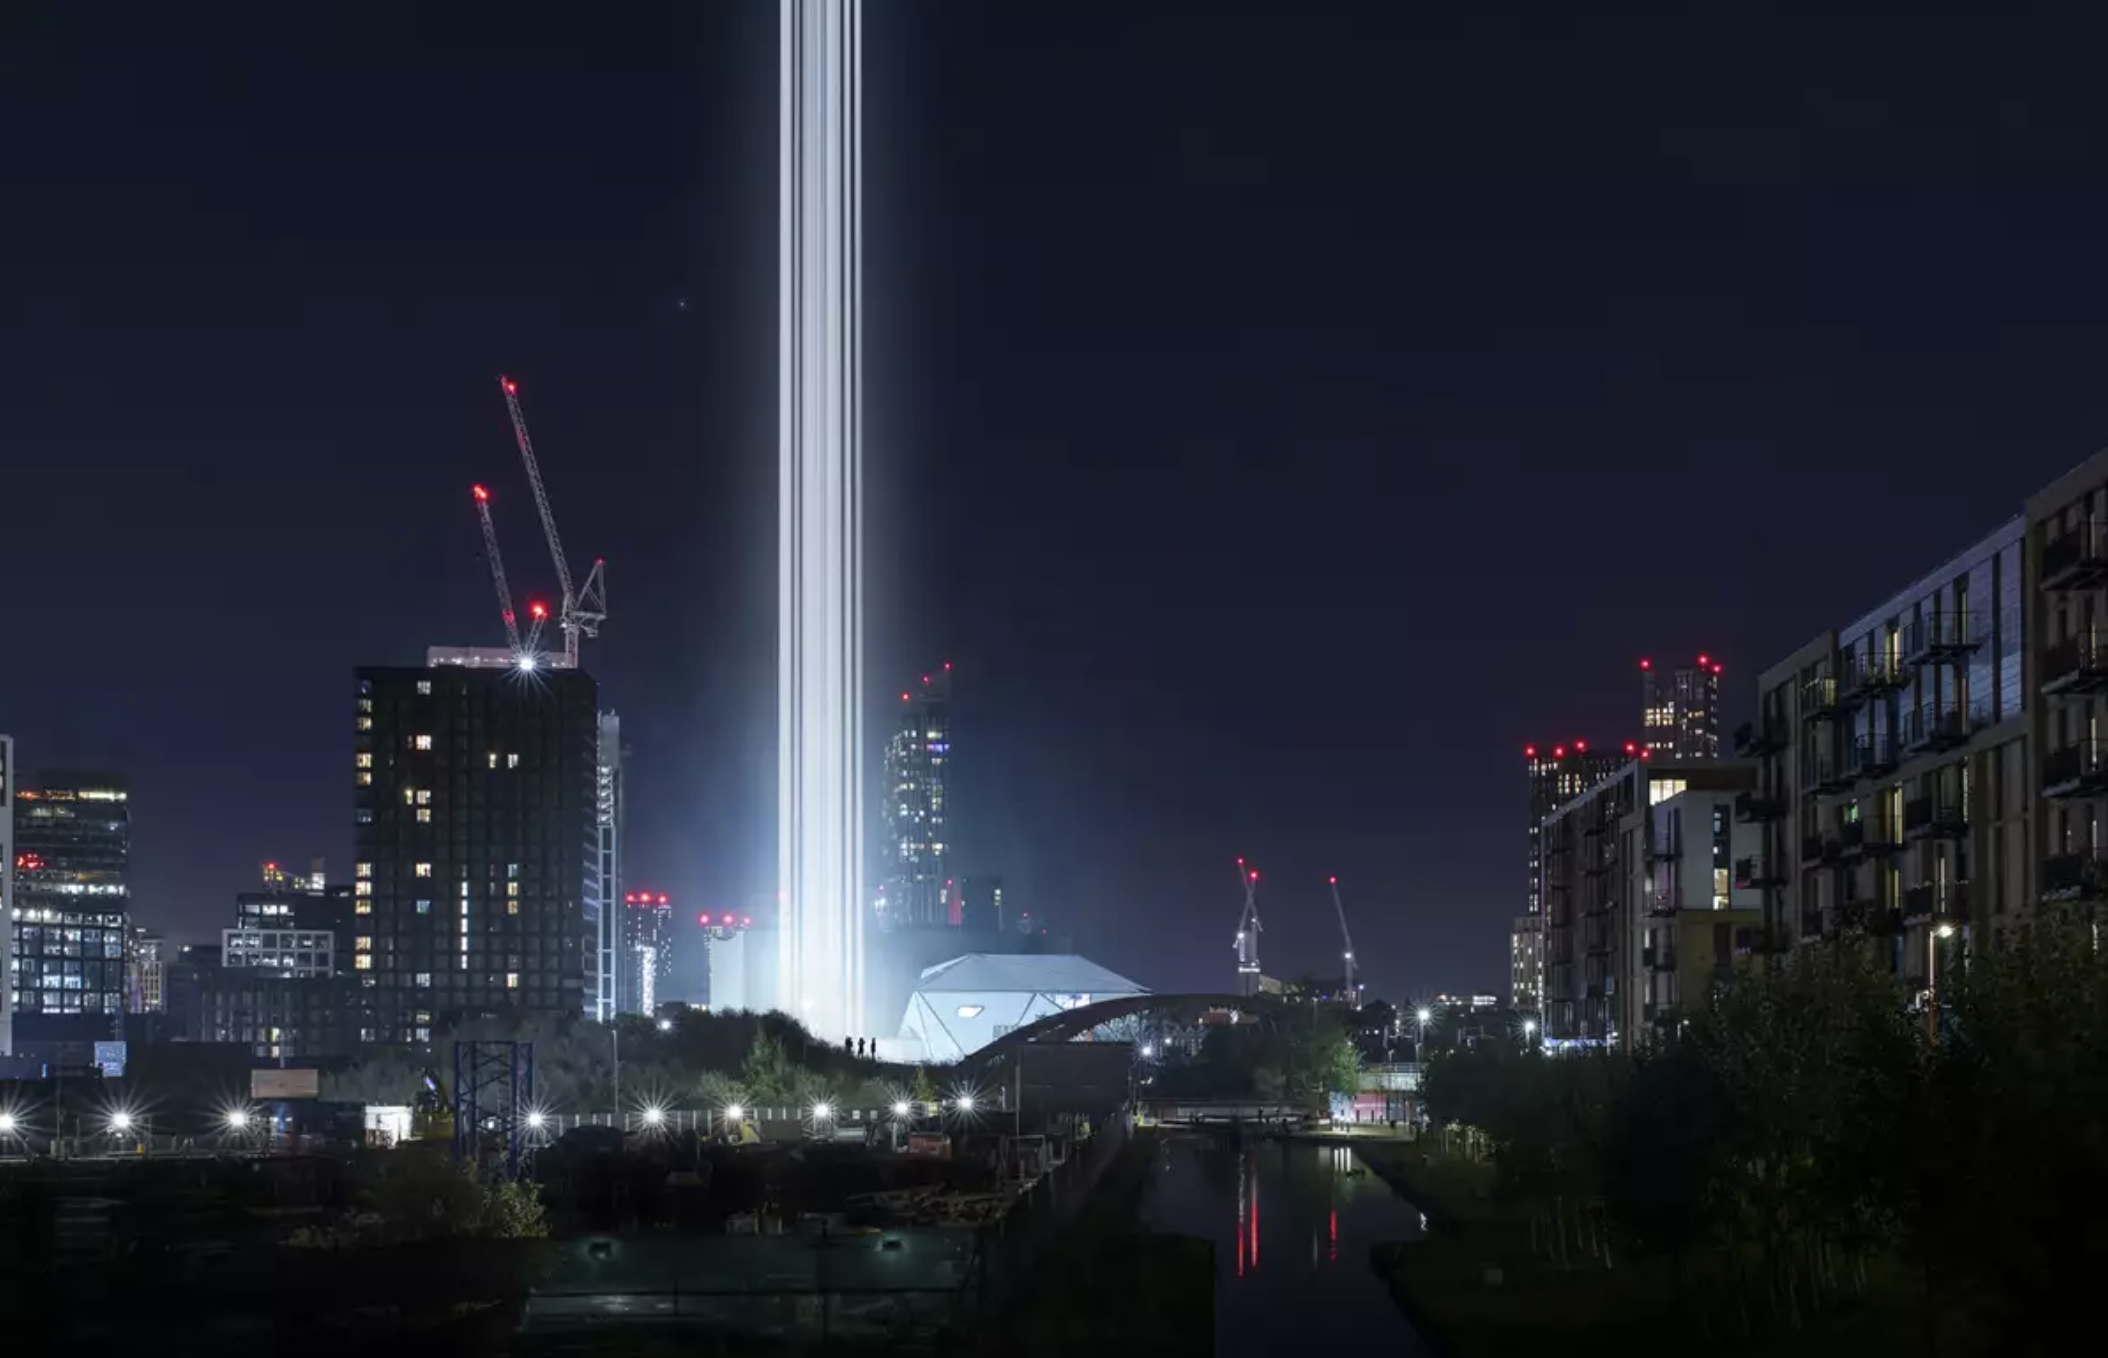 First Breath Light beams illuminate Manchester skyline in new Factory